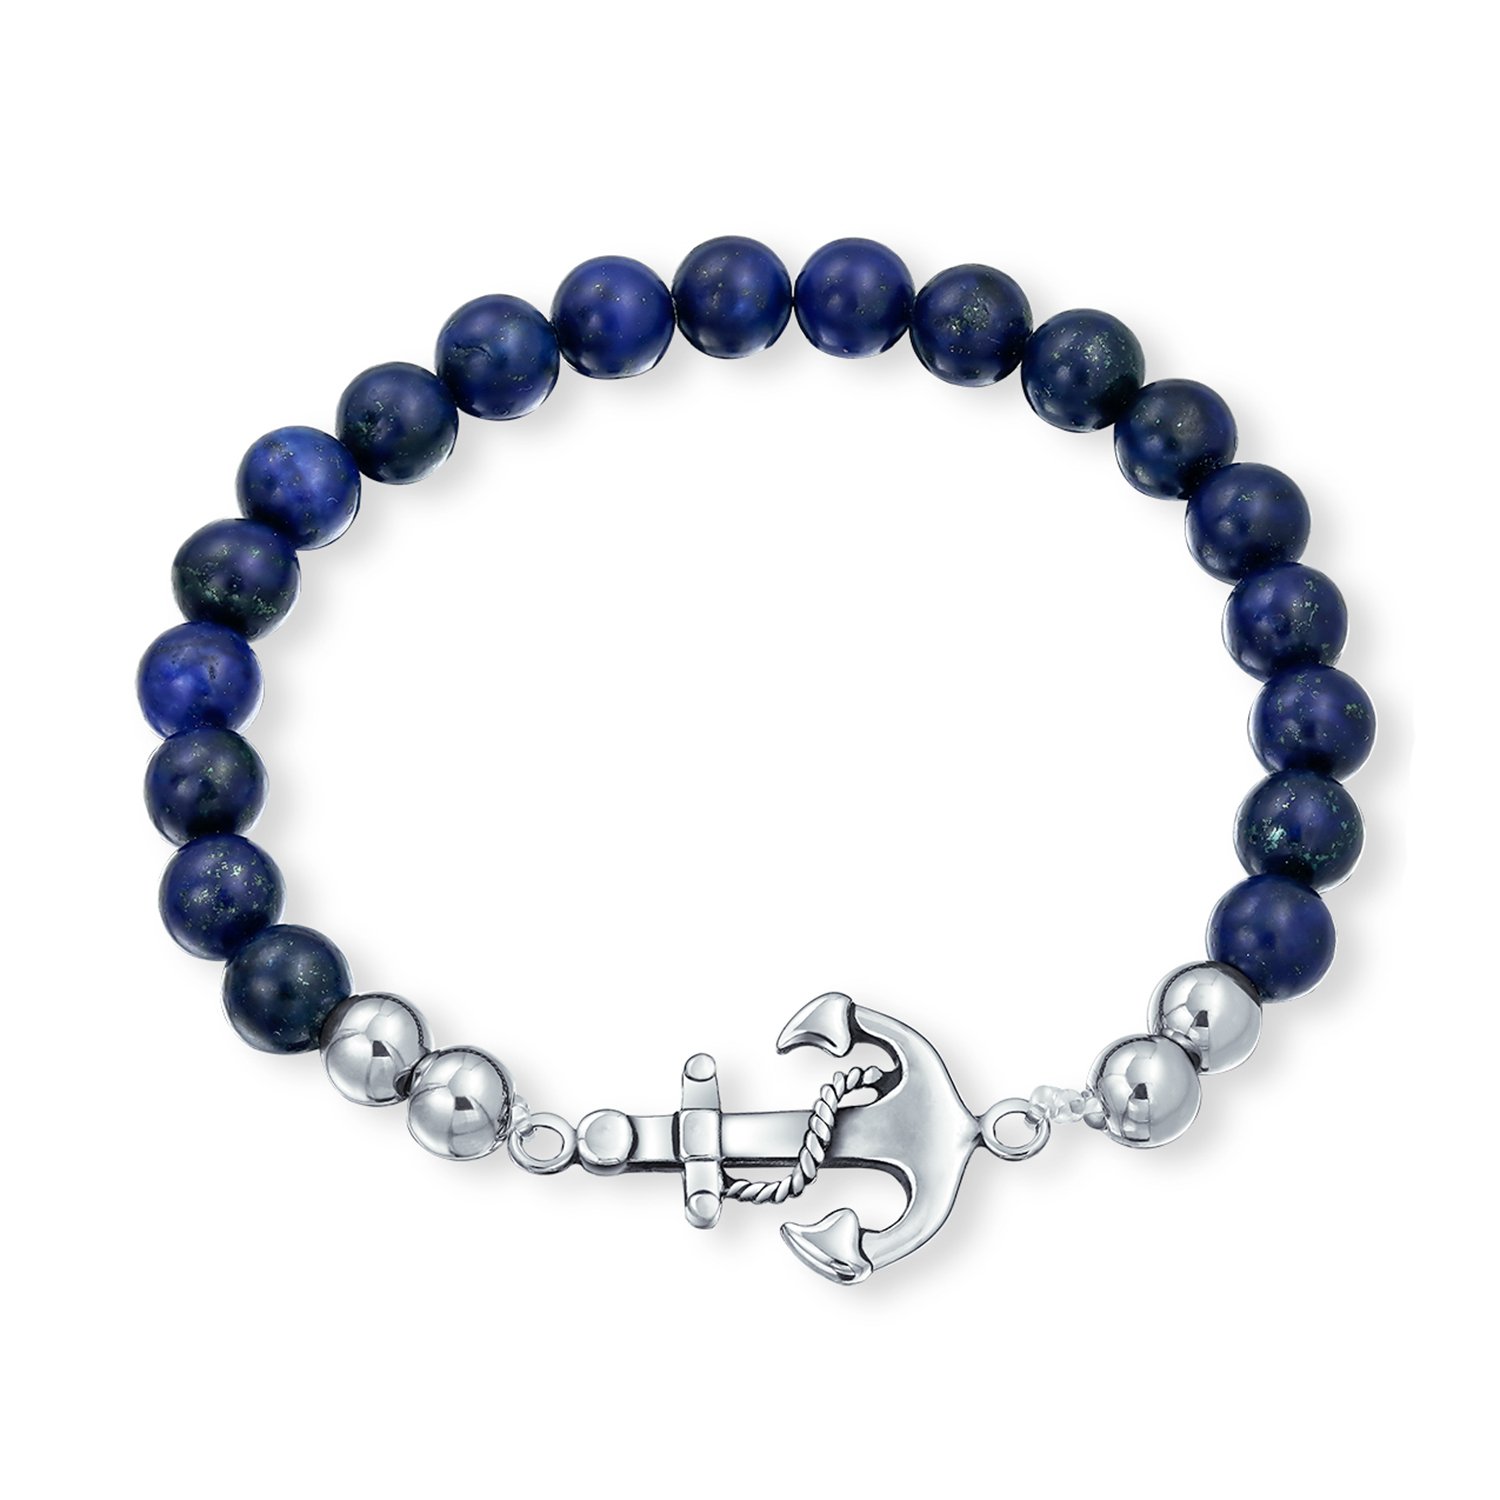 Bling Jewelry Bali Vacation Style Nautical Tropical Navy Blue Lapis Lazuli Nautical Rope Boat Anchor Blue Turquoise Fish Pisces Zodiac Charm Bead Stretch Bracelet for Women Teens Silver Plated